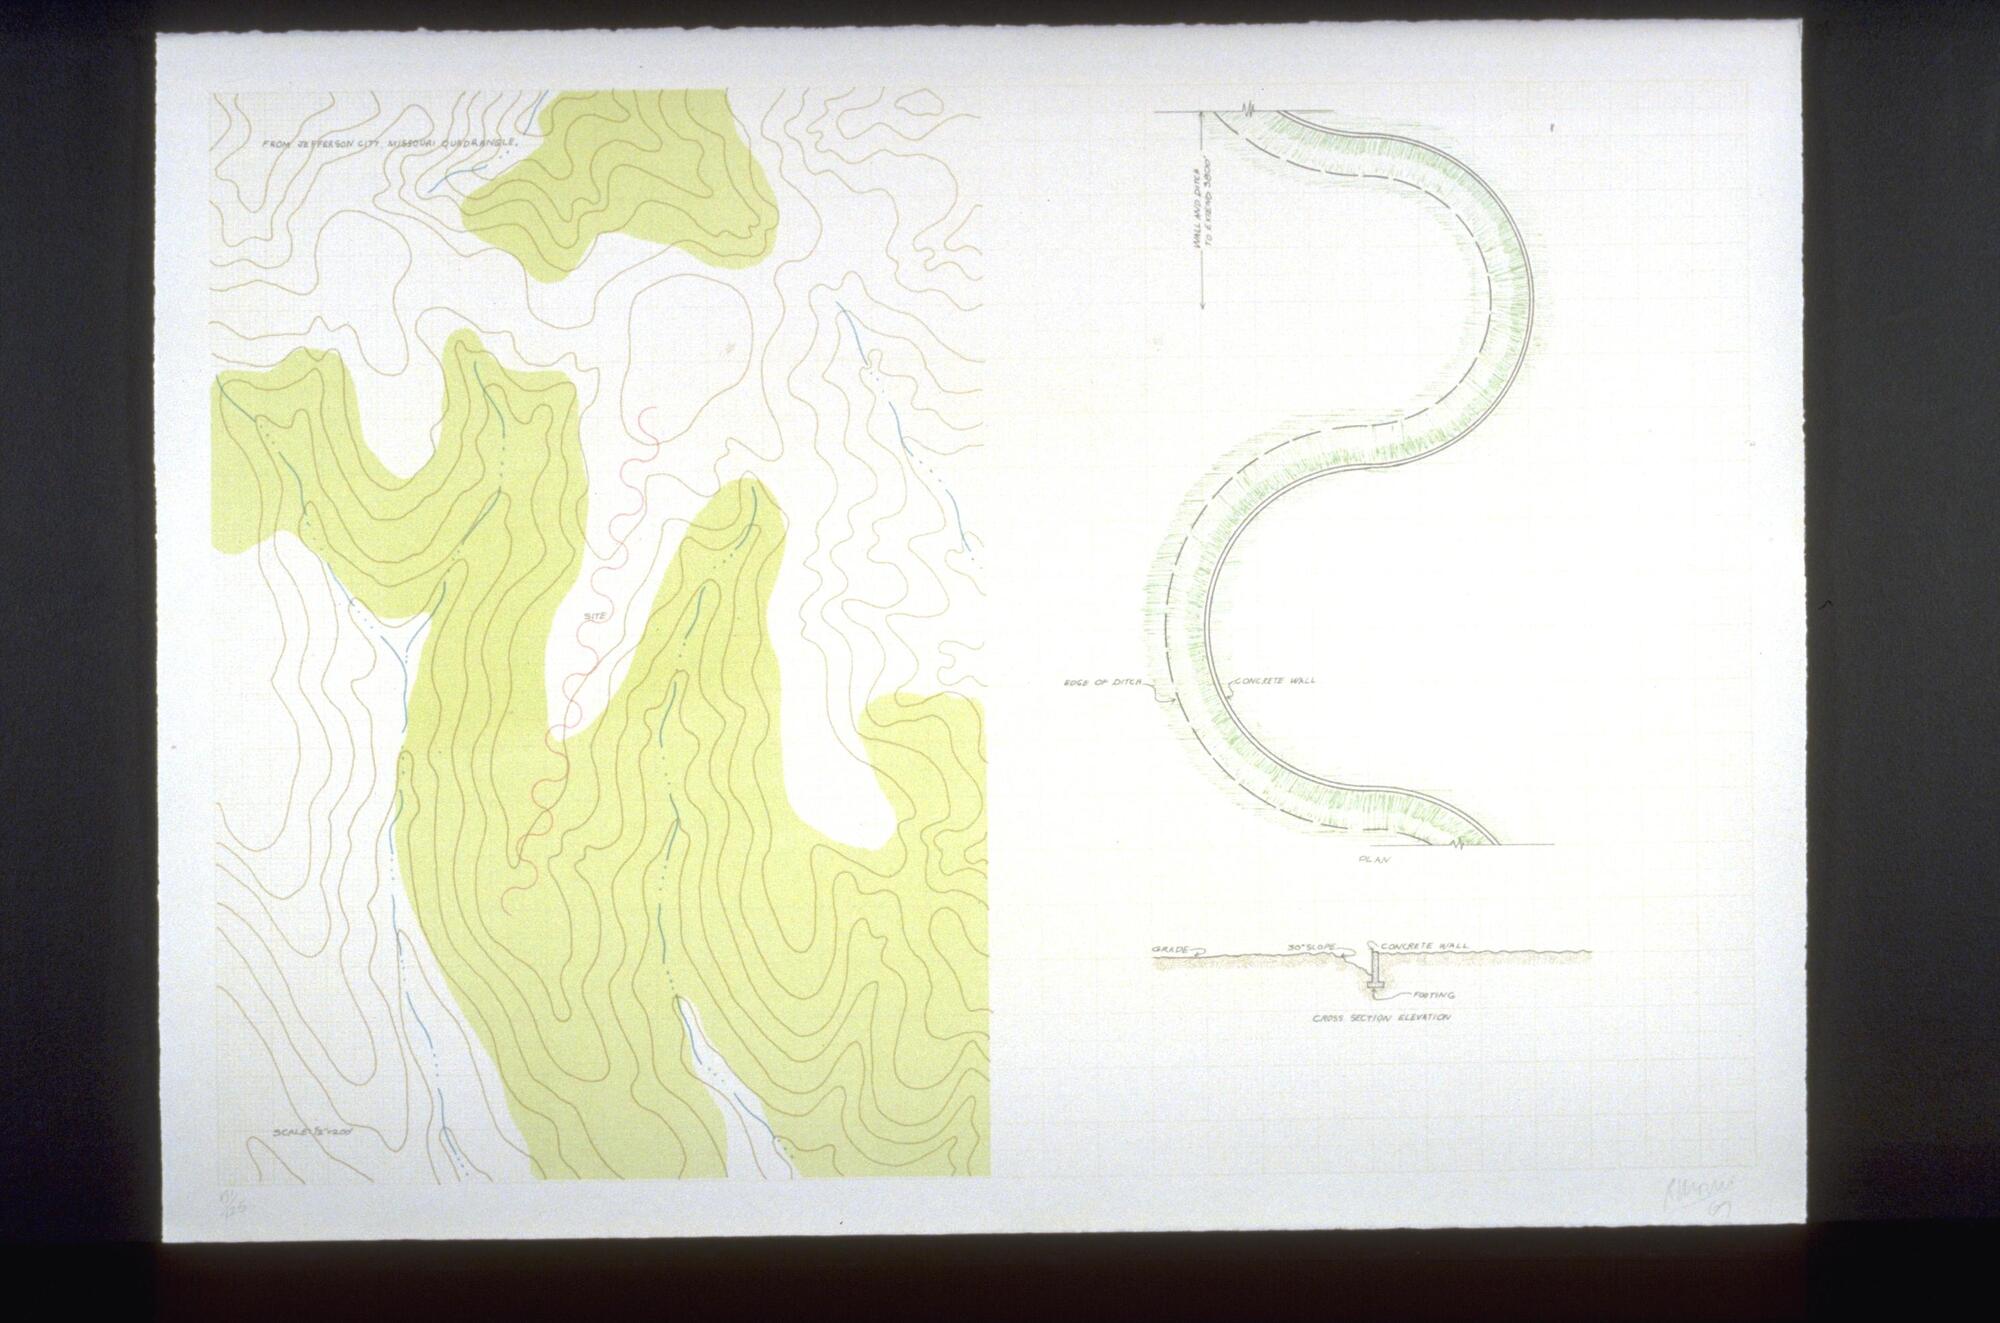 This lithograph on white wove paper is horizontally oriented with a grid of light gray lines on a white background. On the left side there is a contour map with green areas. There is a red squiggly line in the center portion of the map. On the right side there are two diagrams. One is a cross section of a flat surface with an indentation in the middle portion.  The other is a backward “S” shaped form shaded with fine green lines. There are word labels throughout this work. <br />